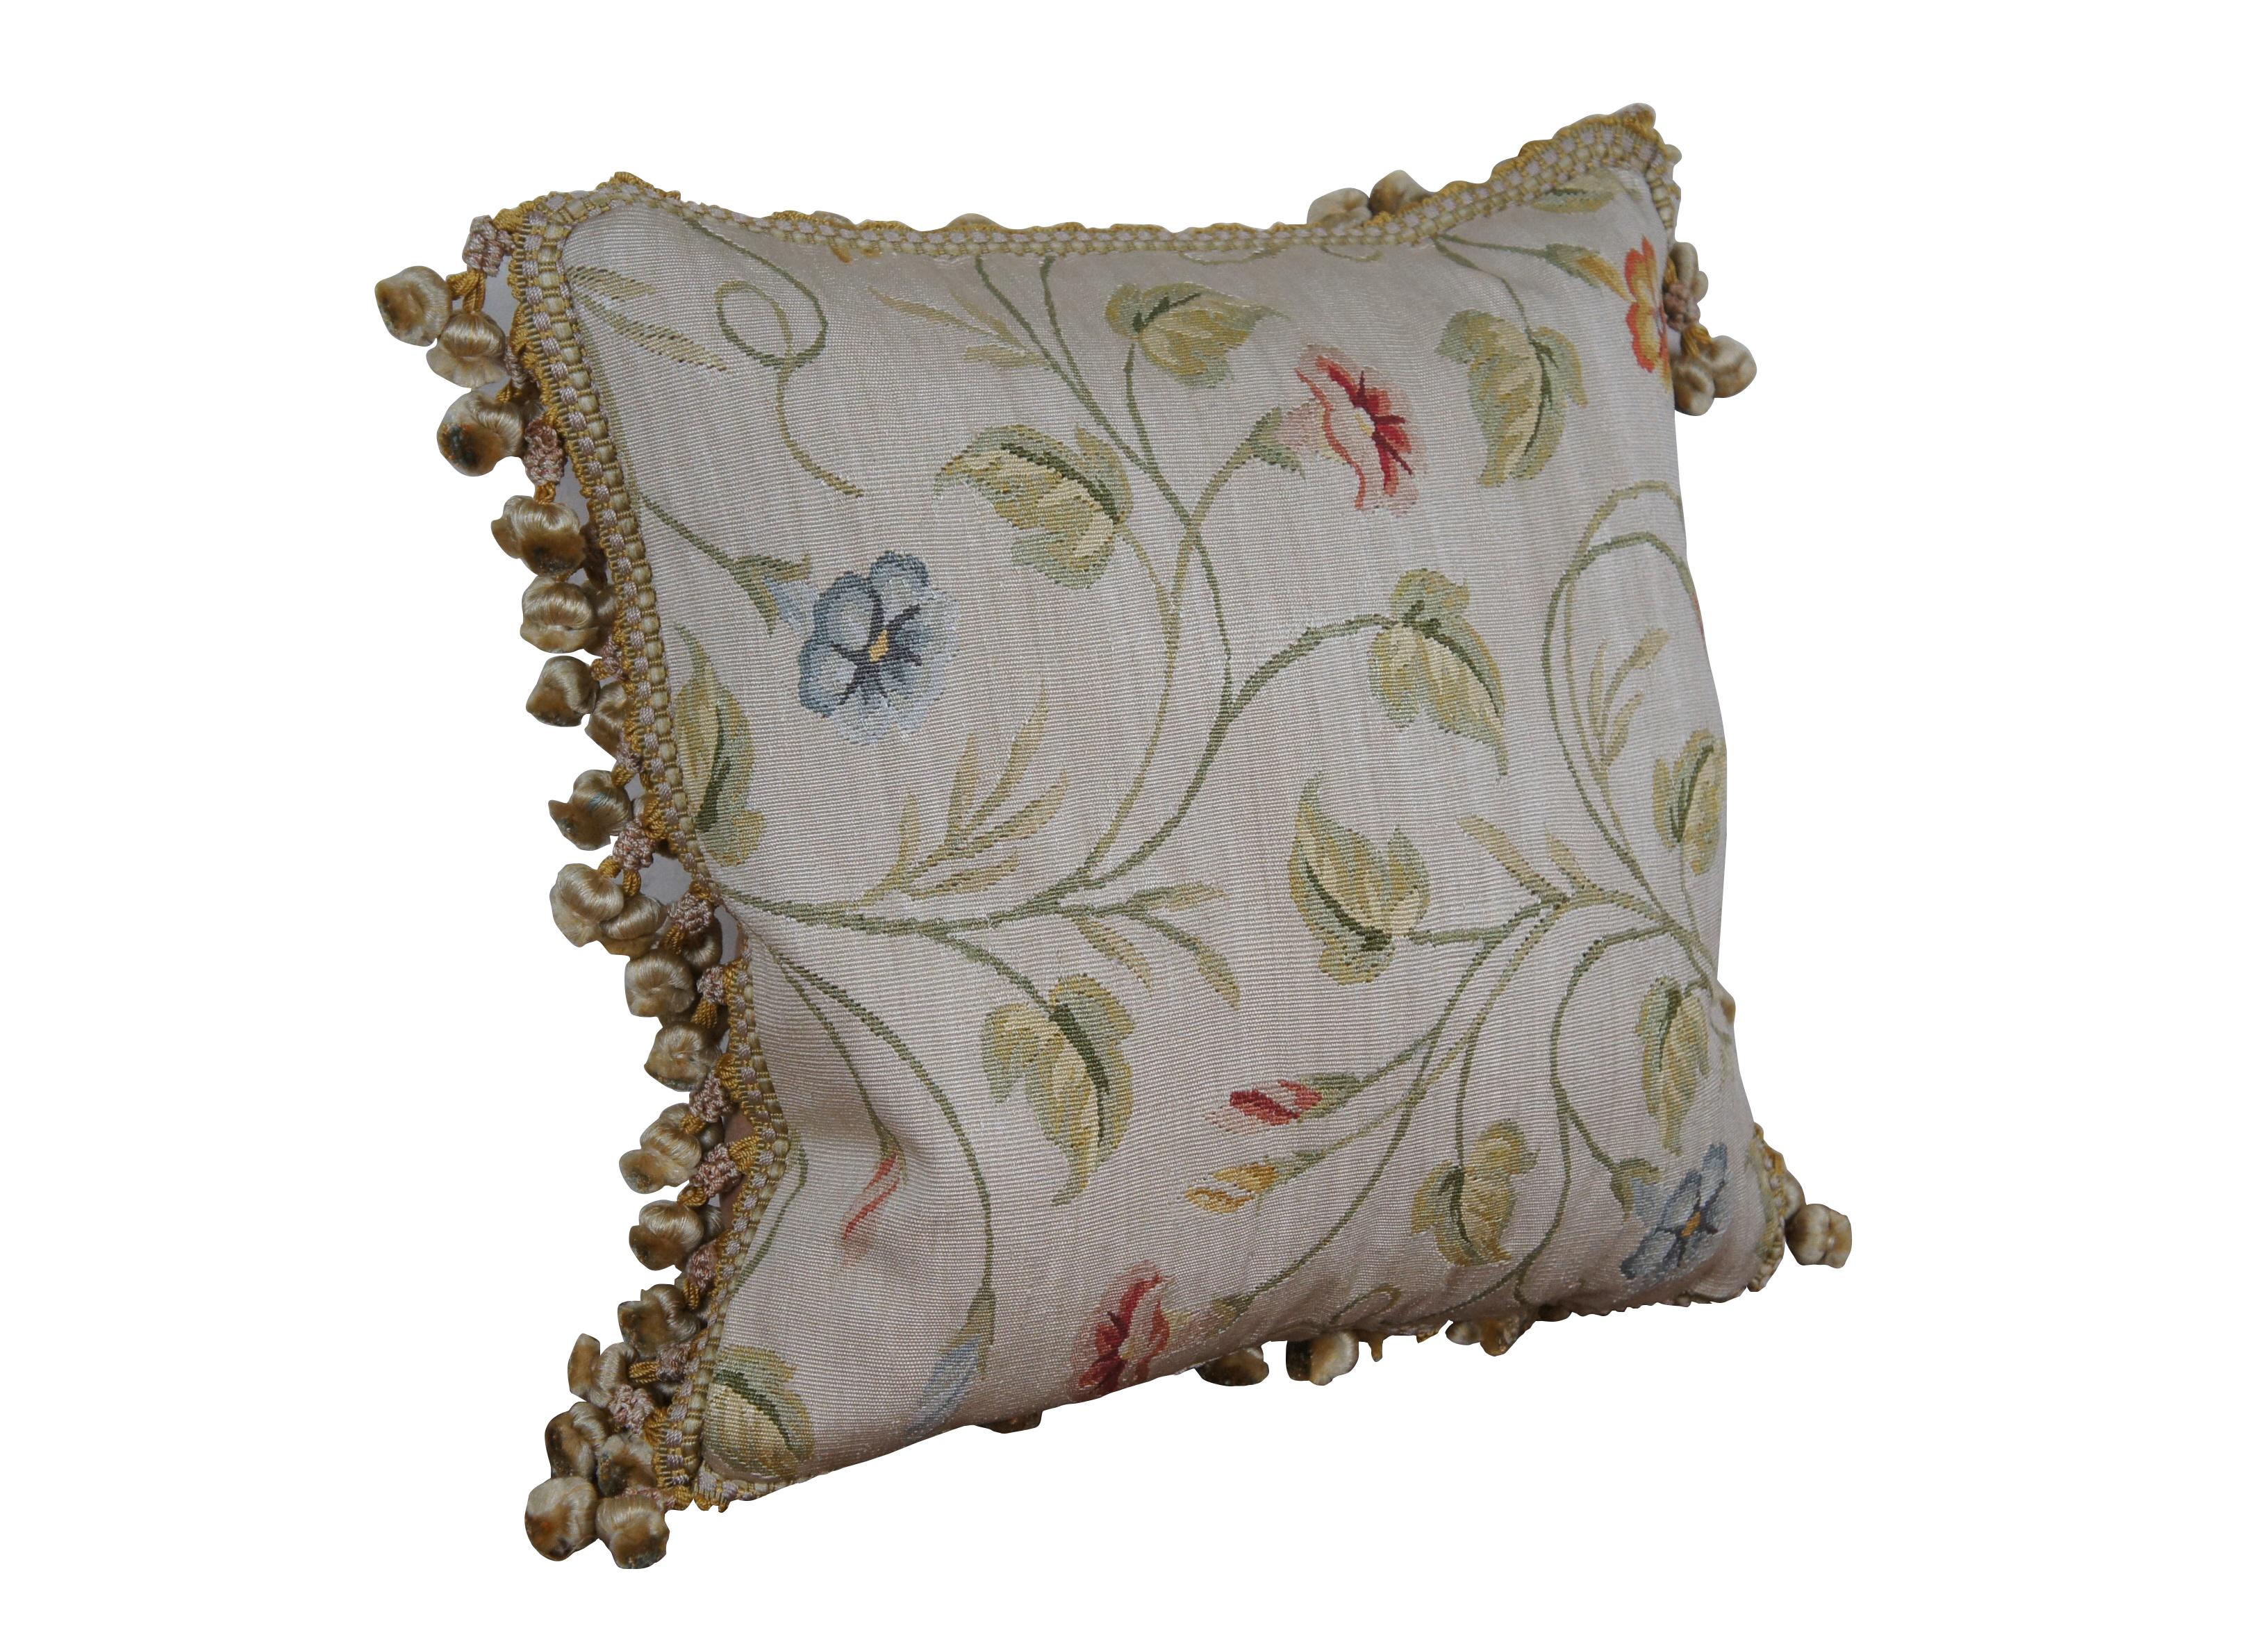 3 Available - 20th century square throw pillow, embroidered in silk with twisting green leafy stems sporting pink, blue, and orange morning glories. Cream and gold ball tassel trim. Beige velour back with zipper closure. Down filled.